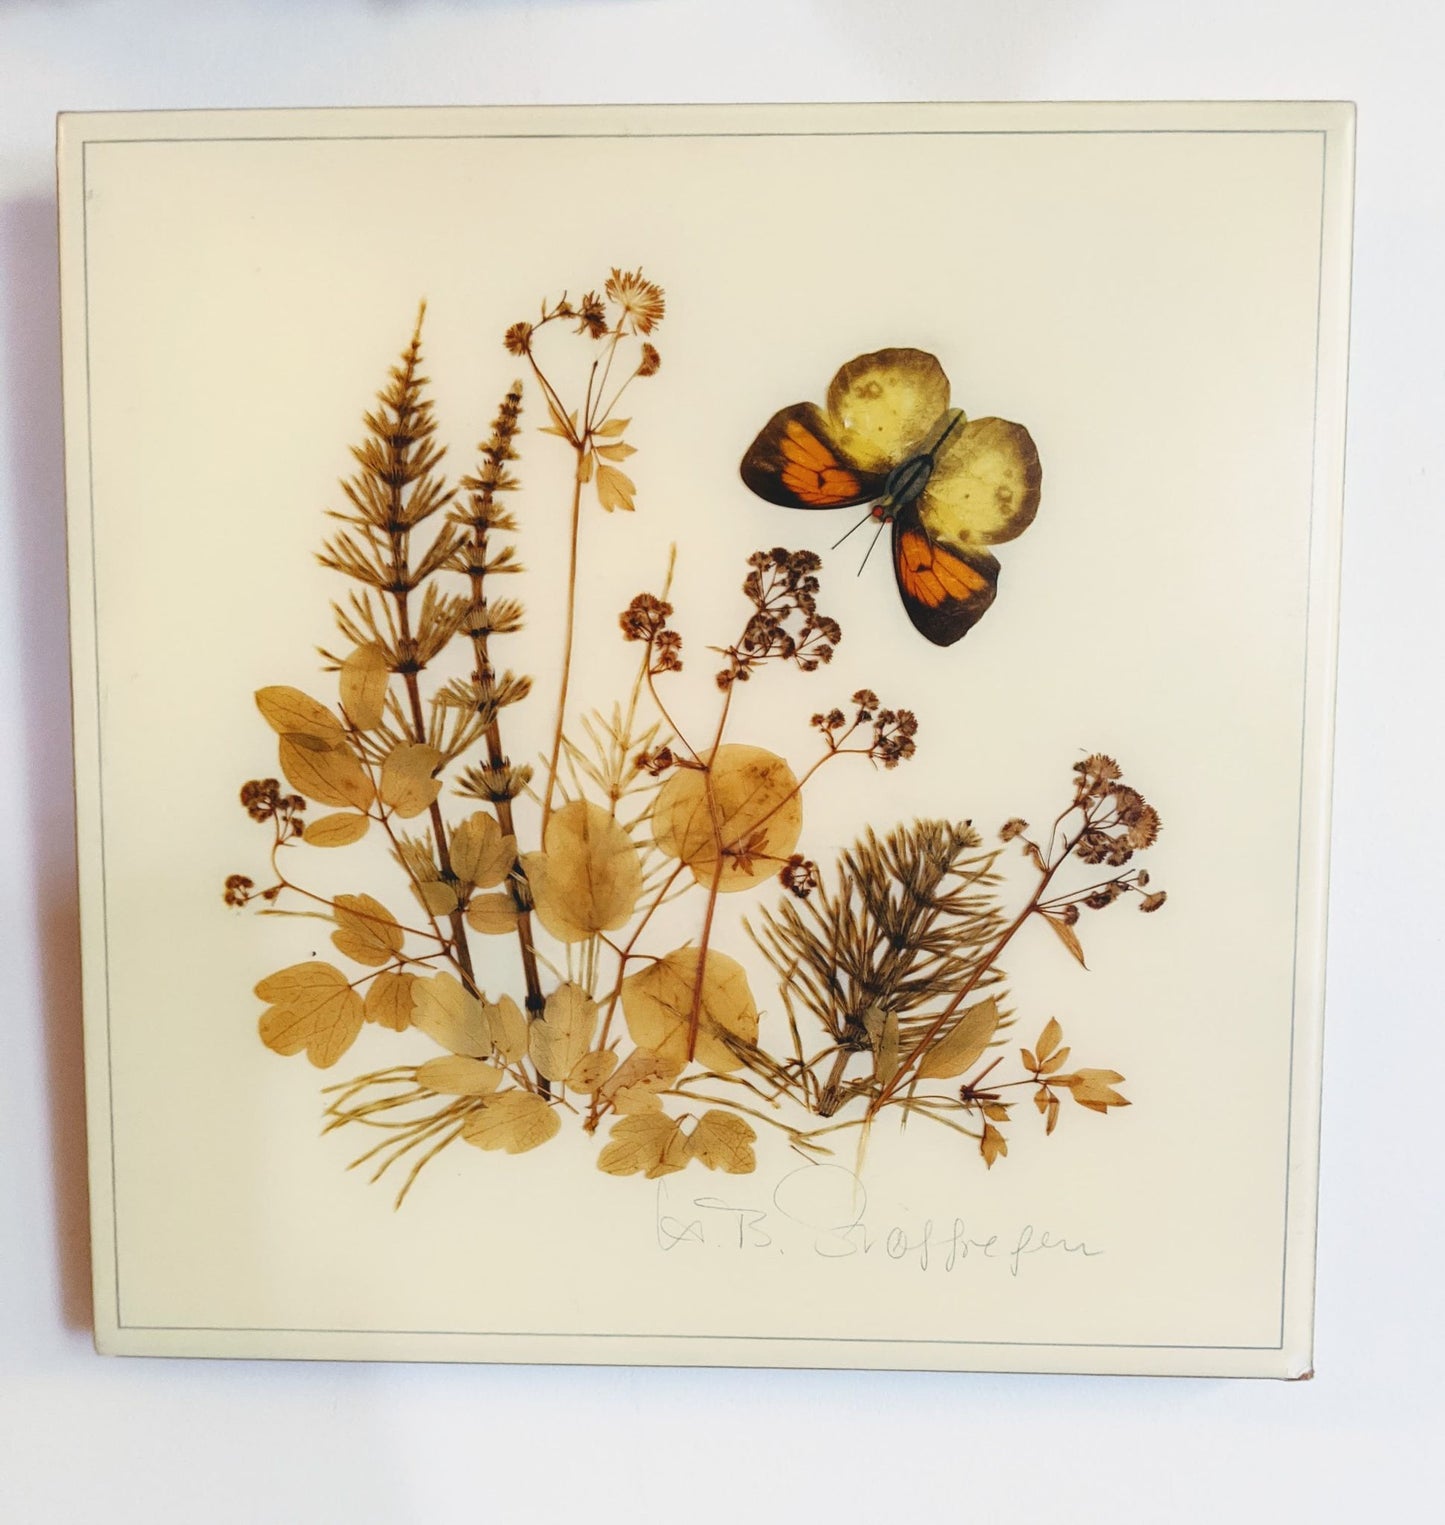 Henni Originals Hand Made Preserved Leaves Wall Art